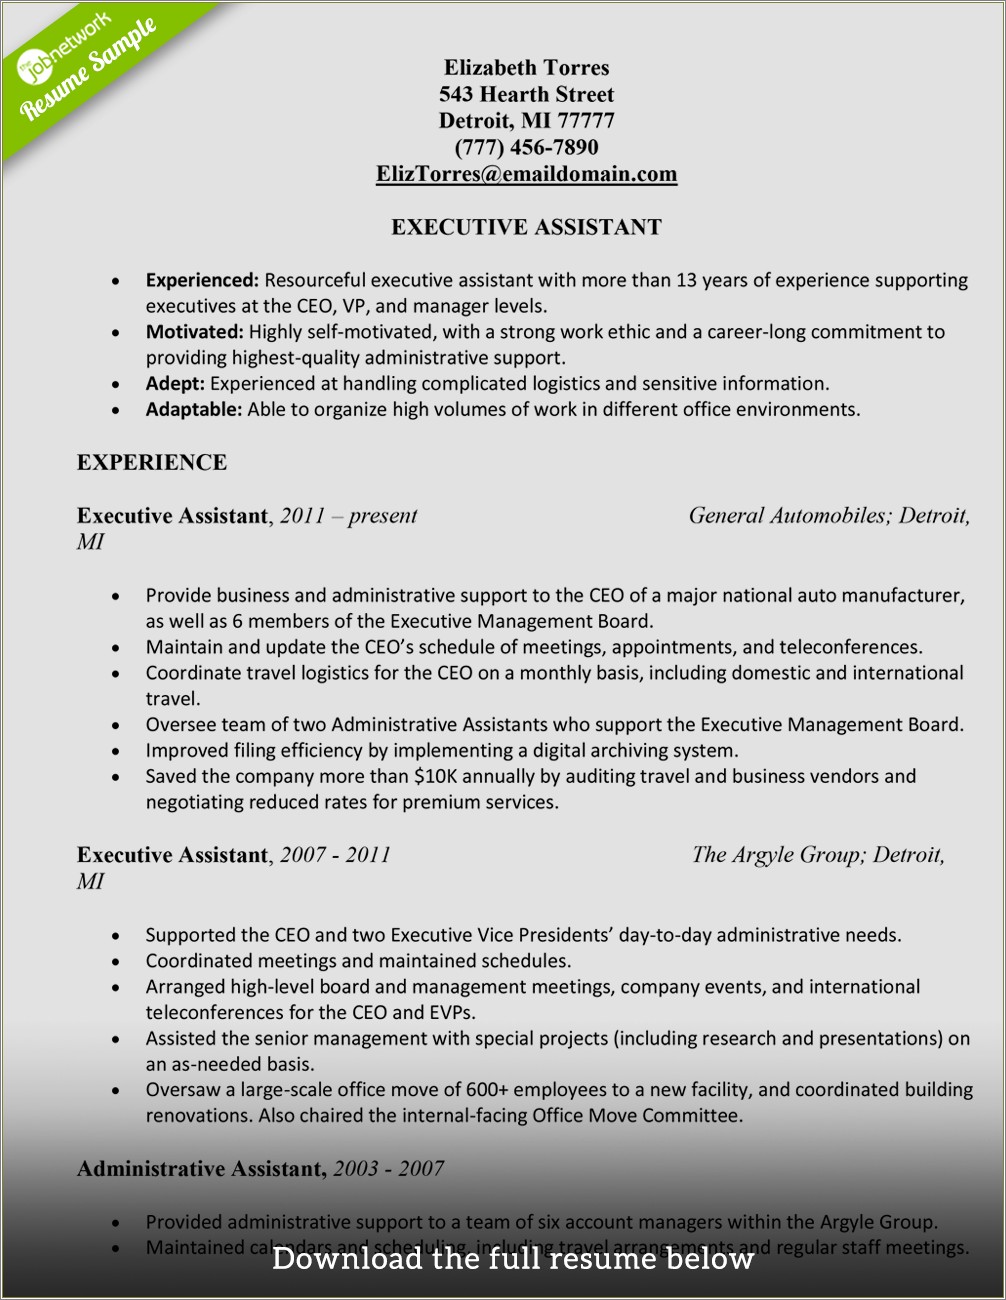 Administrative Assistant Resume Template Word 2003